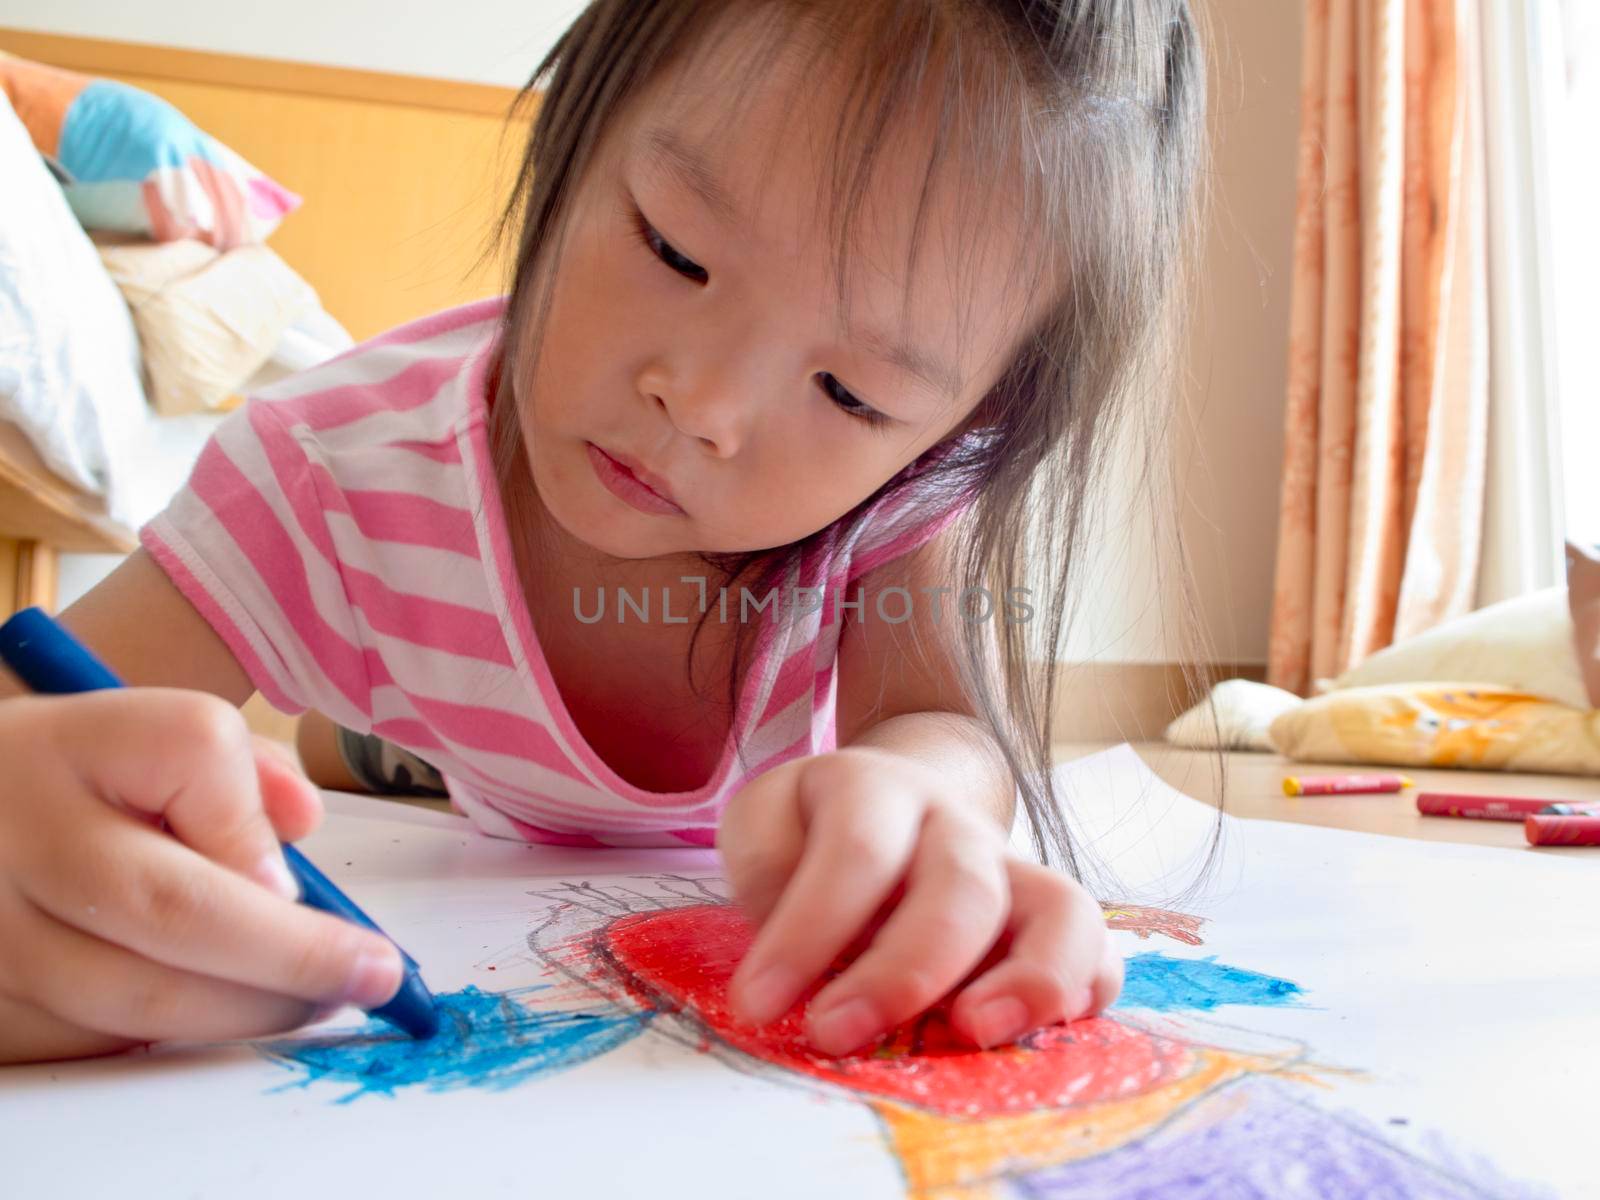 Asian girl Painting crayon on large sheets of paper On the floor of her room